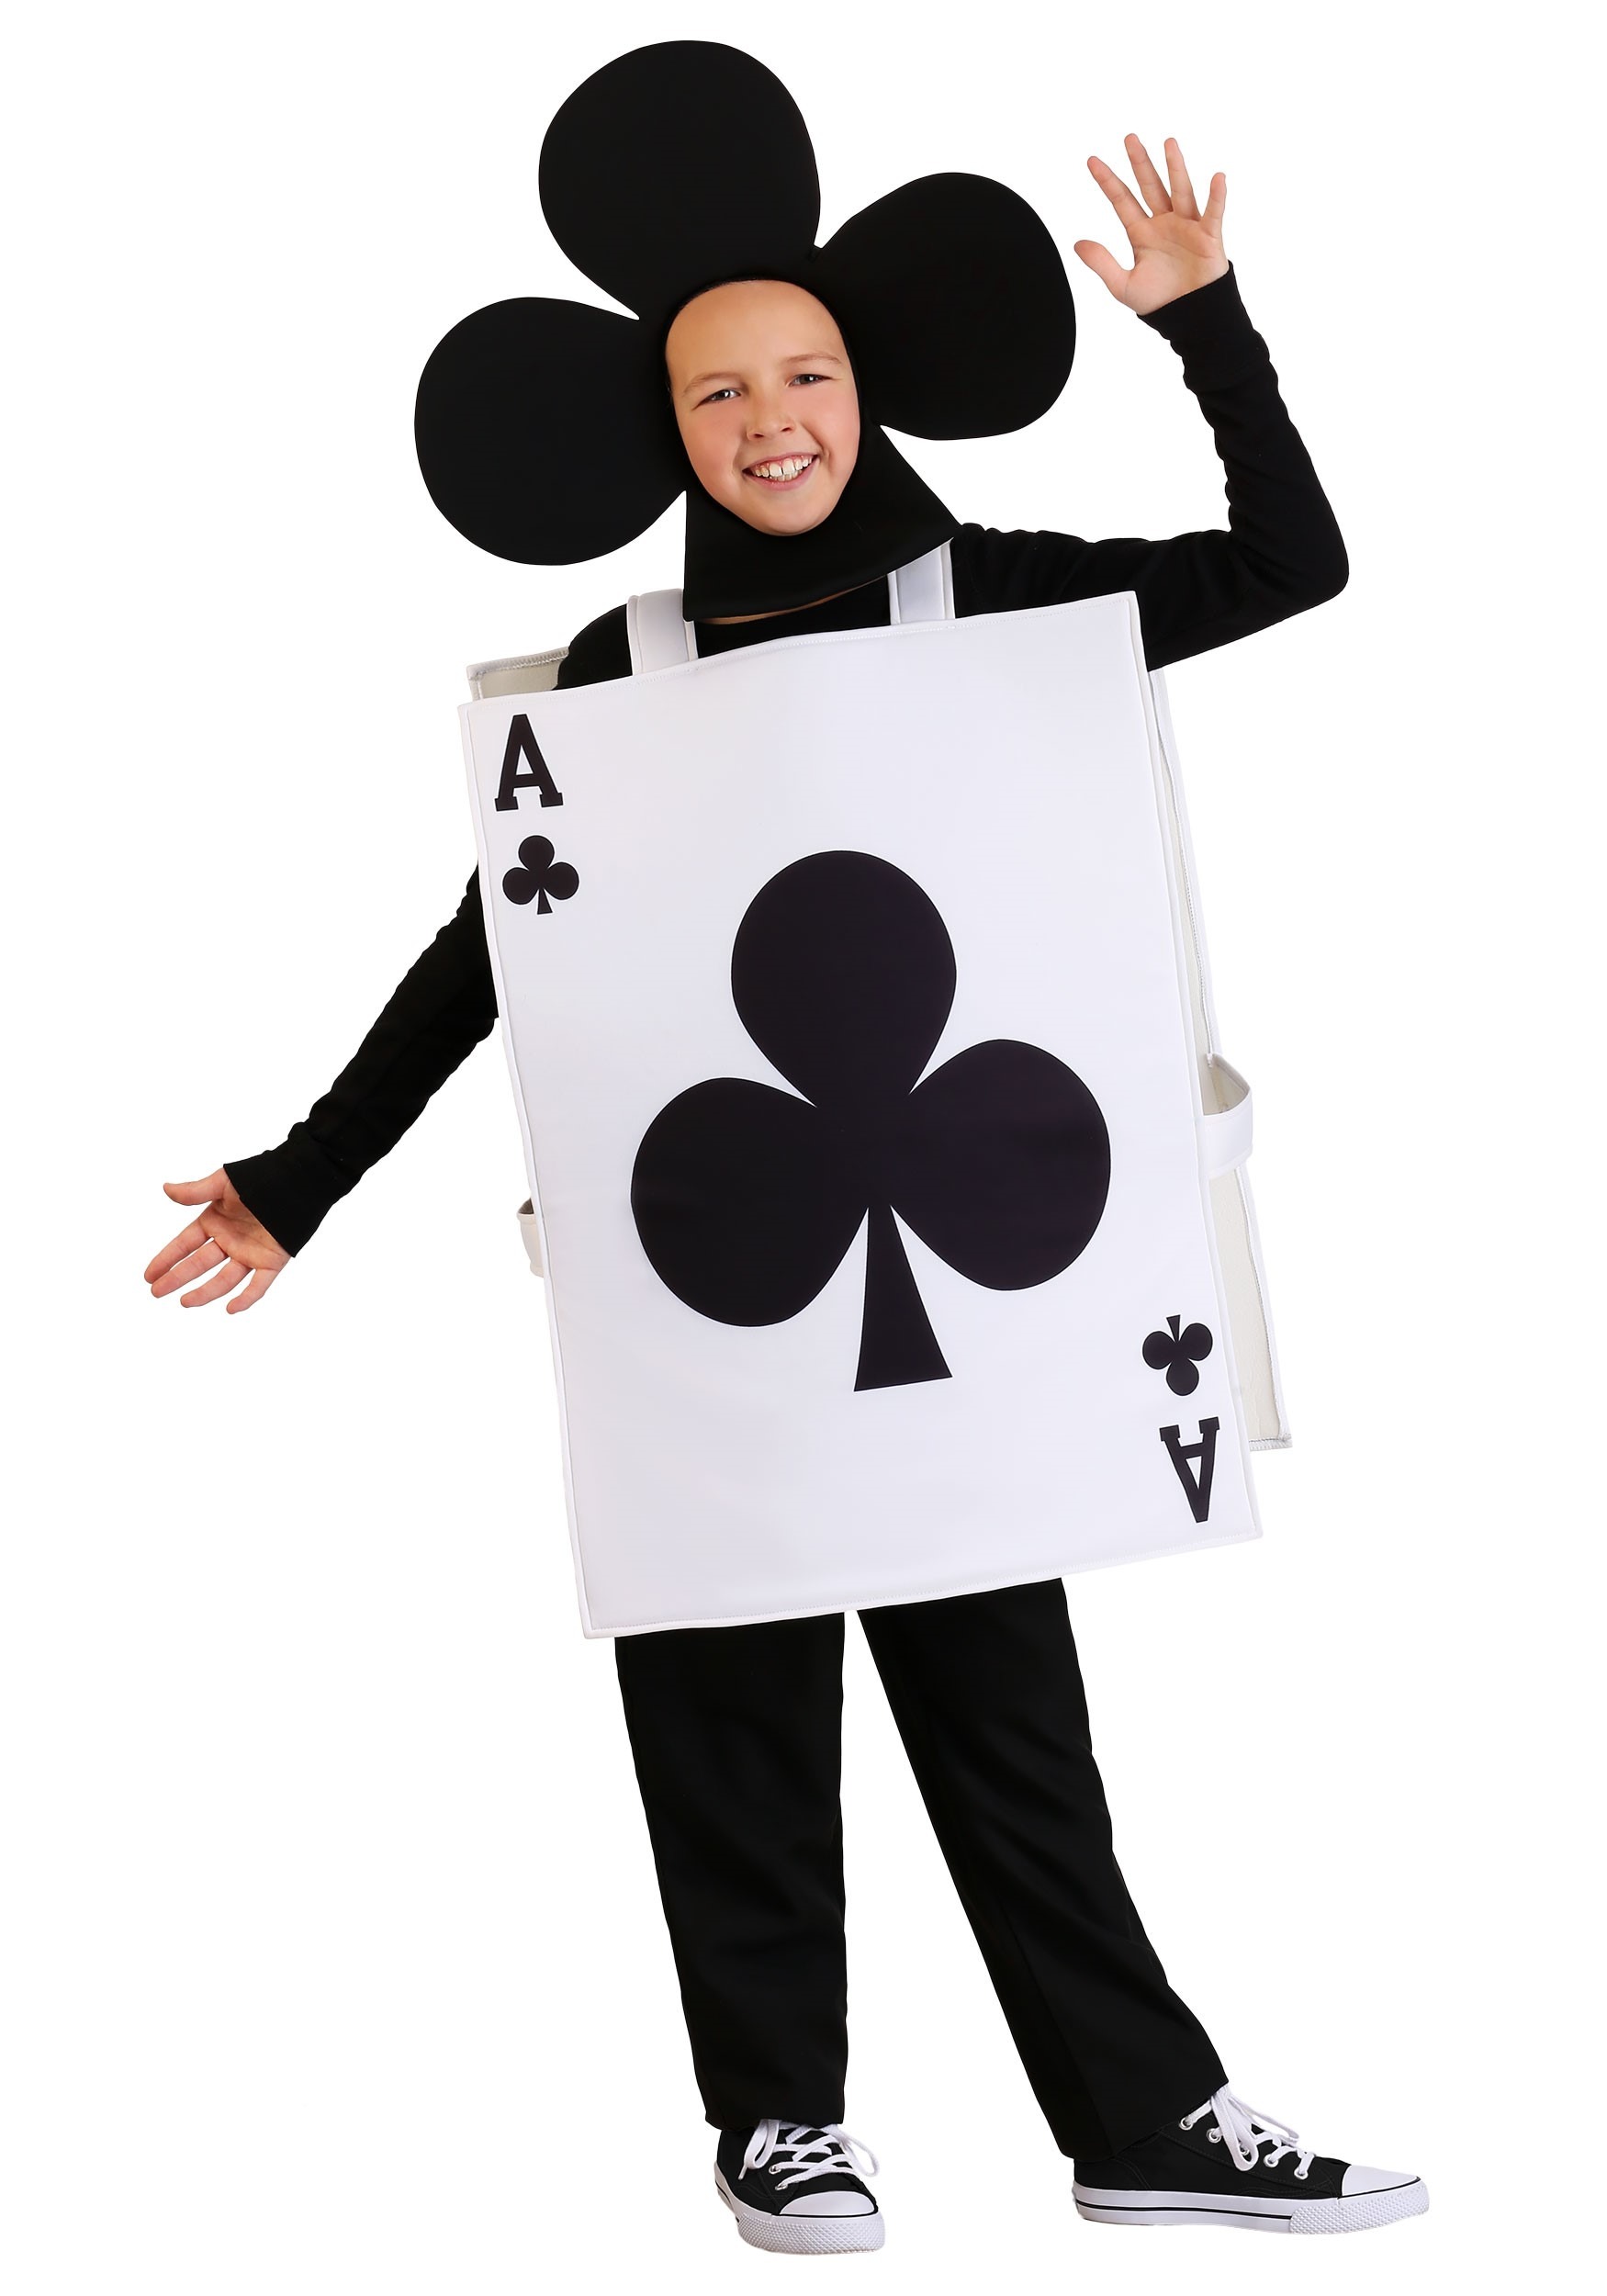 Ace of Clubs Kid’s Costume